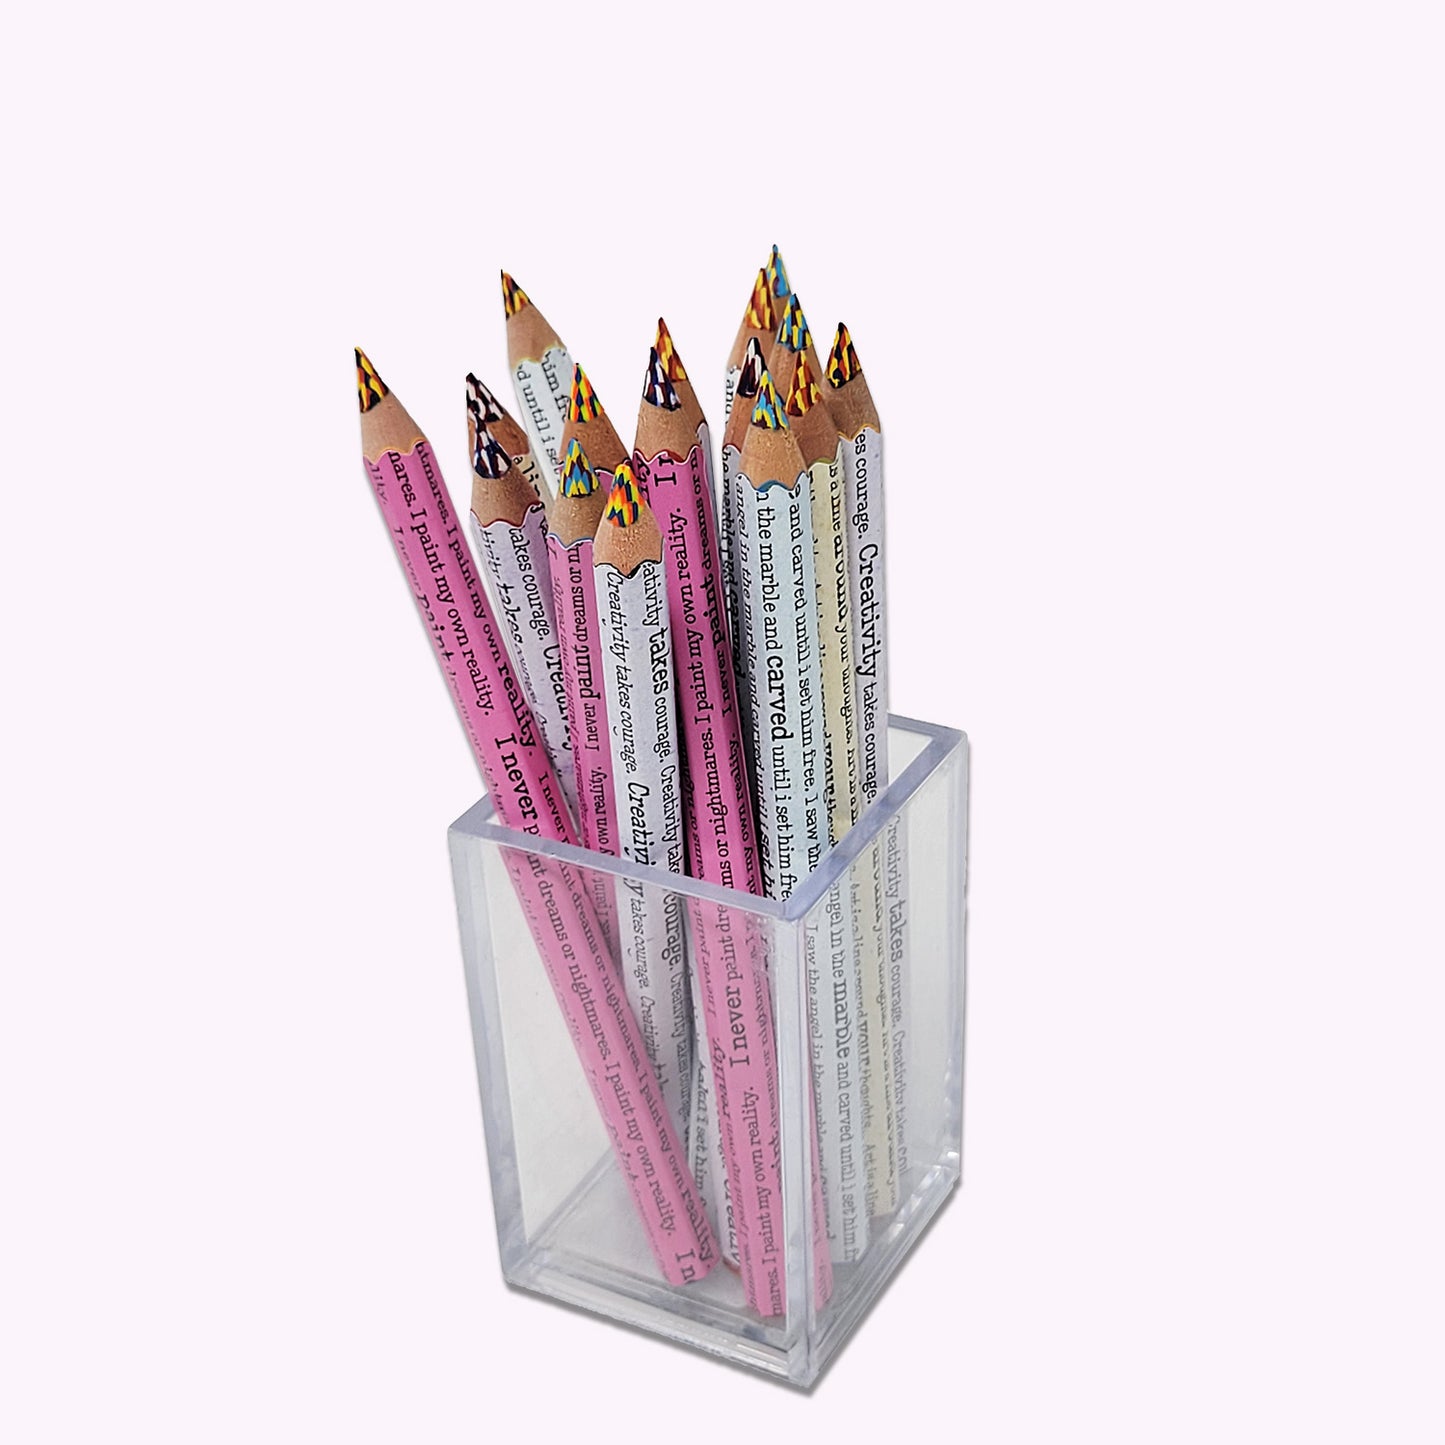 4 Multicolor Pencil wrapped with an Illustration